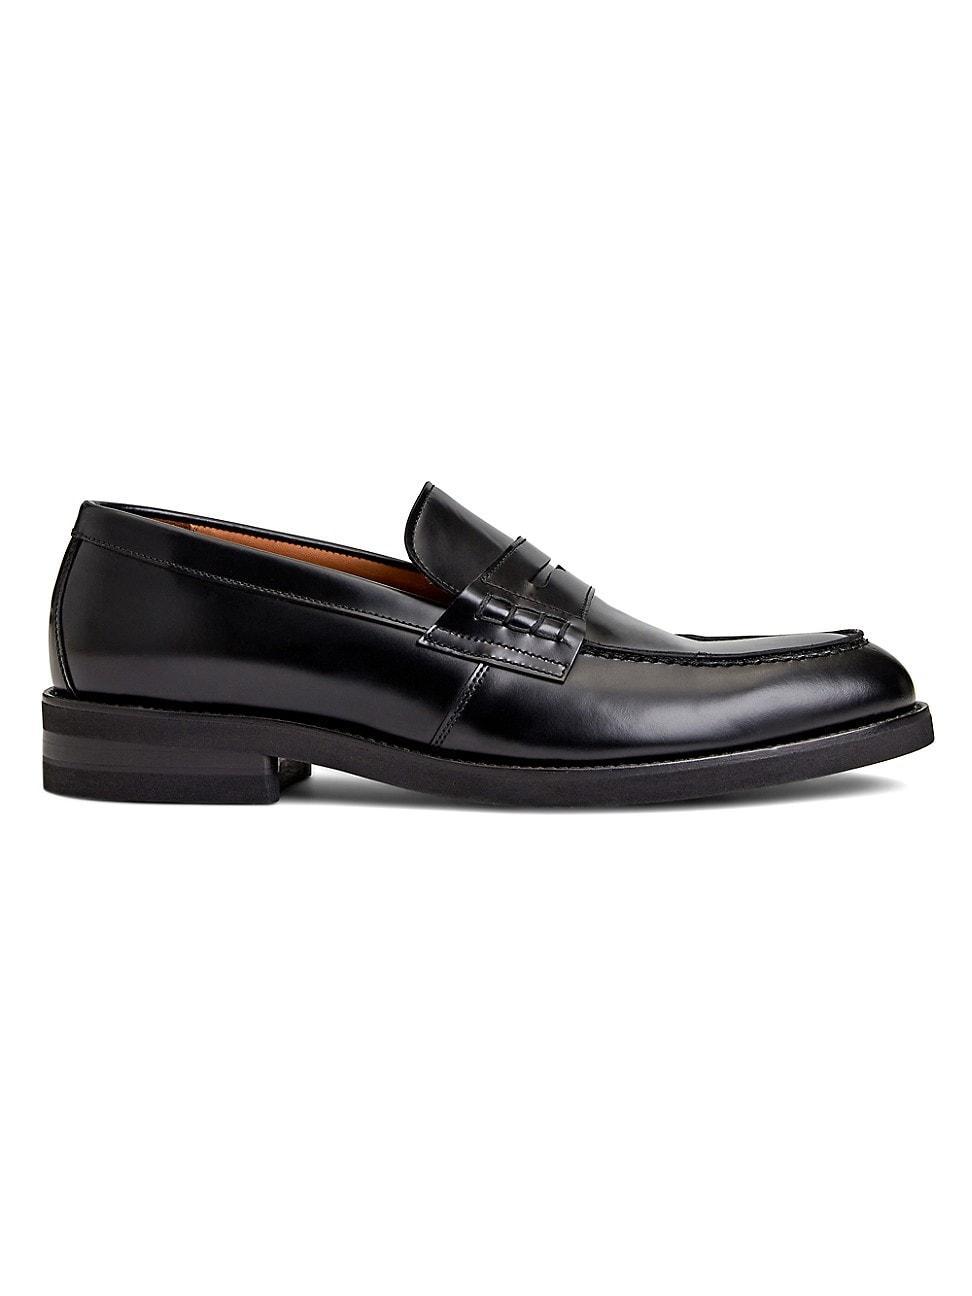 Bruno Magli Mens Silas Slip-On Shoes Mens Shoes Product Image